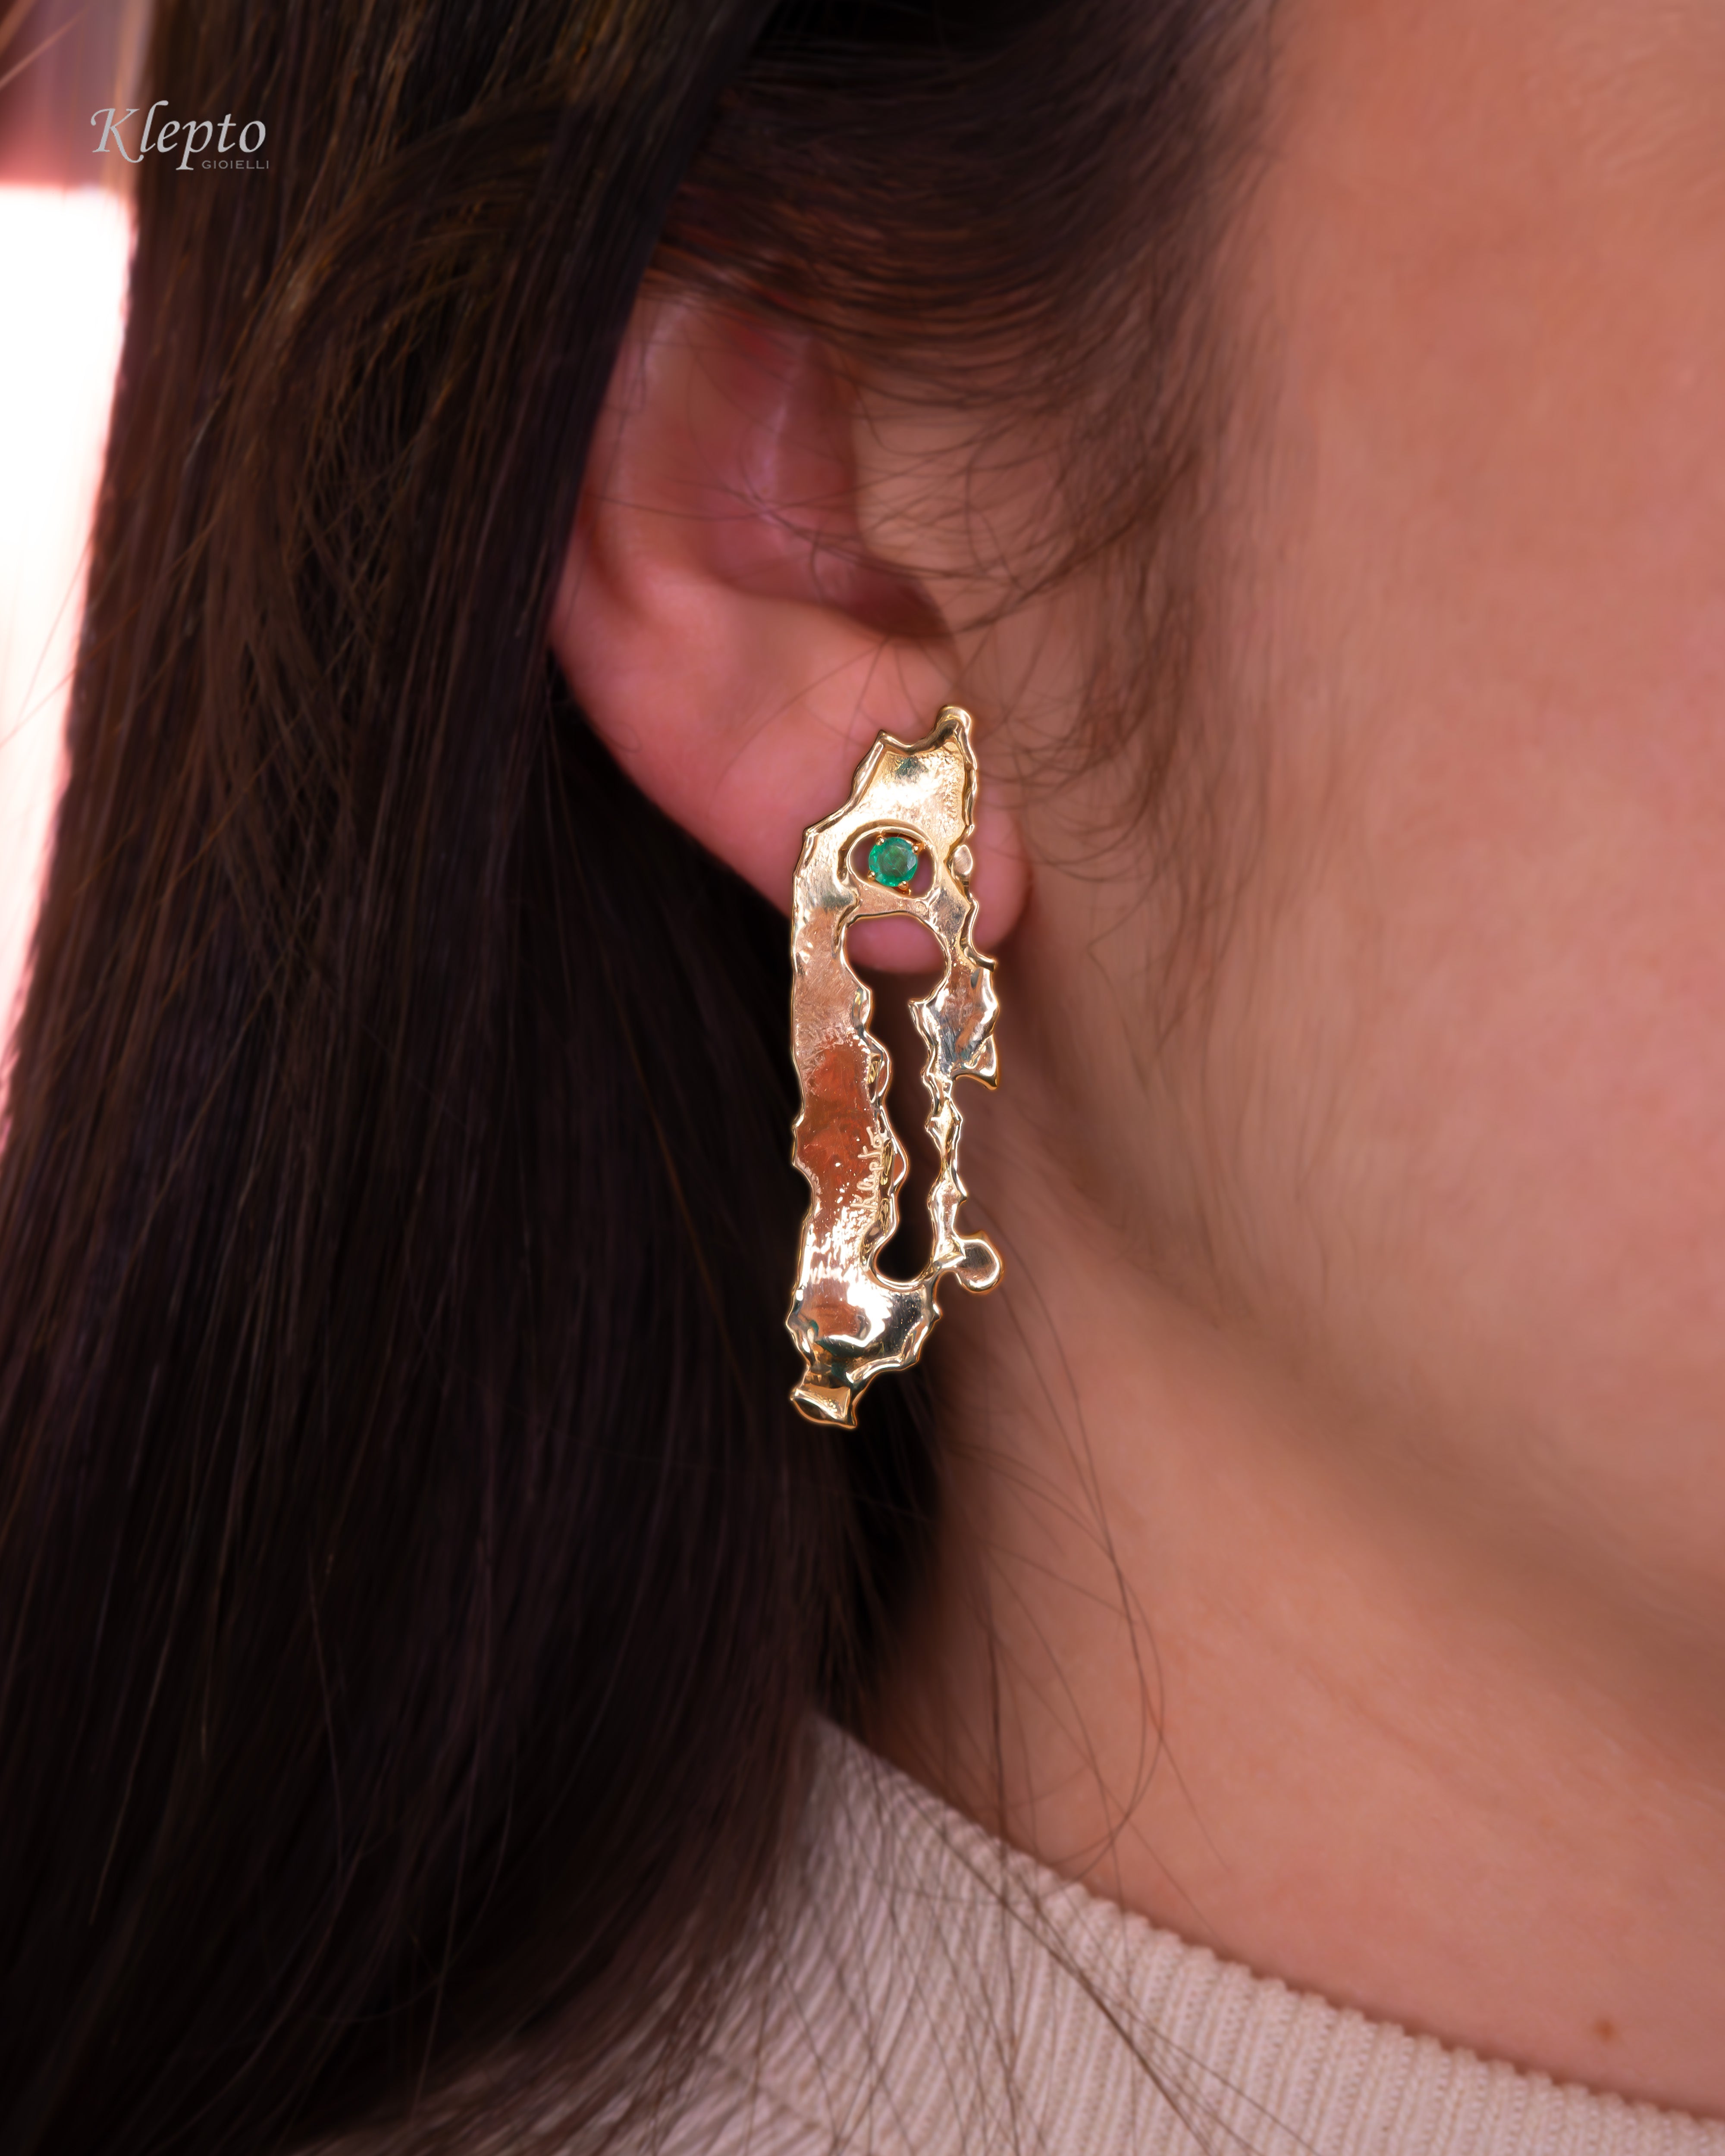 Flame-fused yellow gold earrings with Emeralds